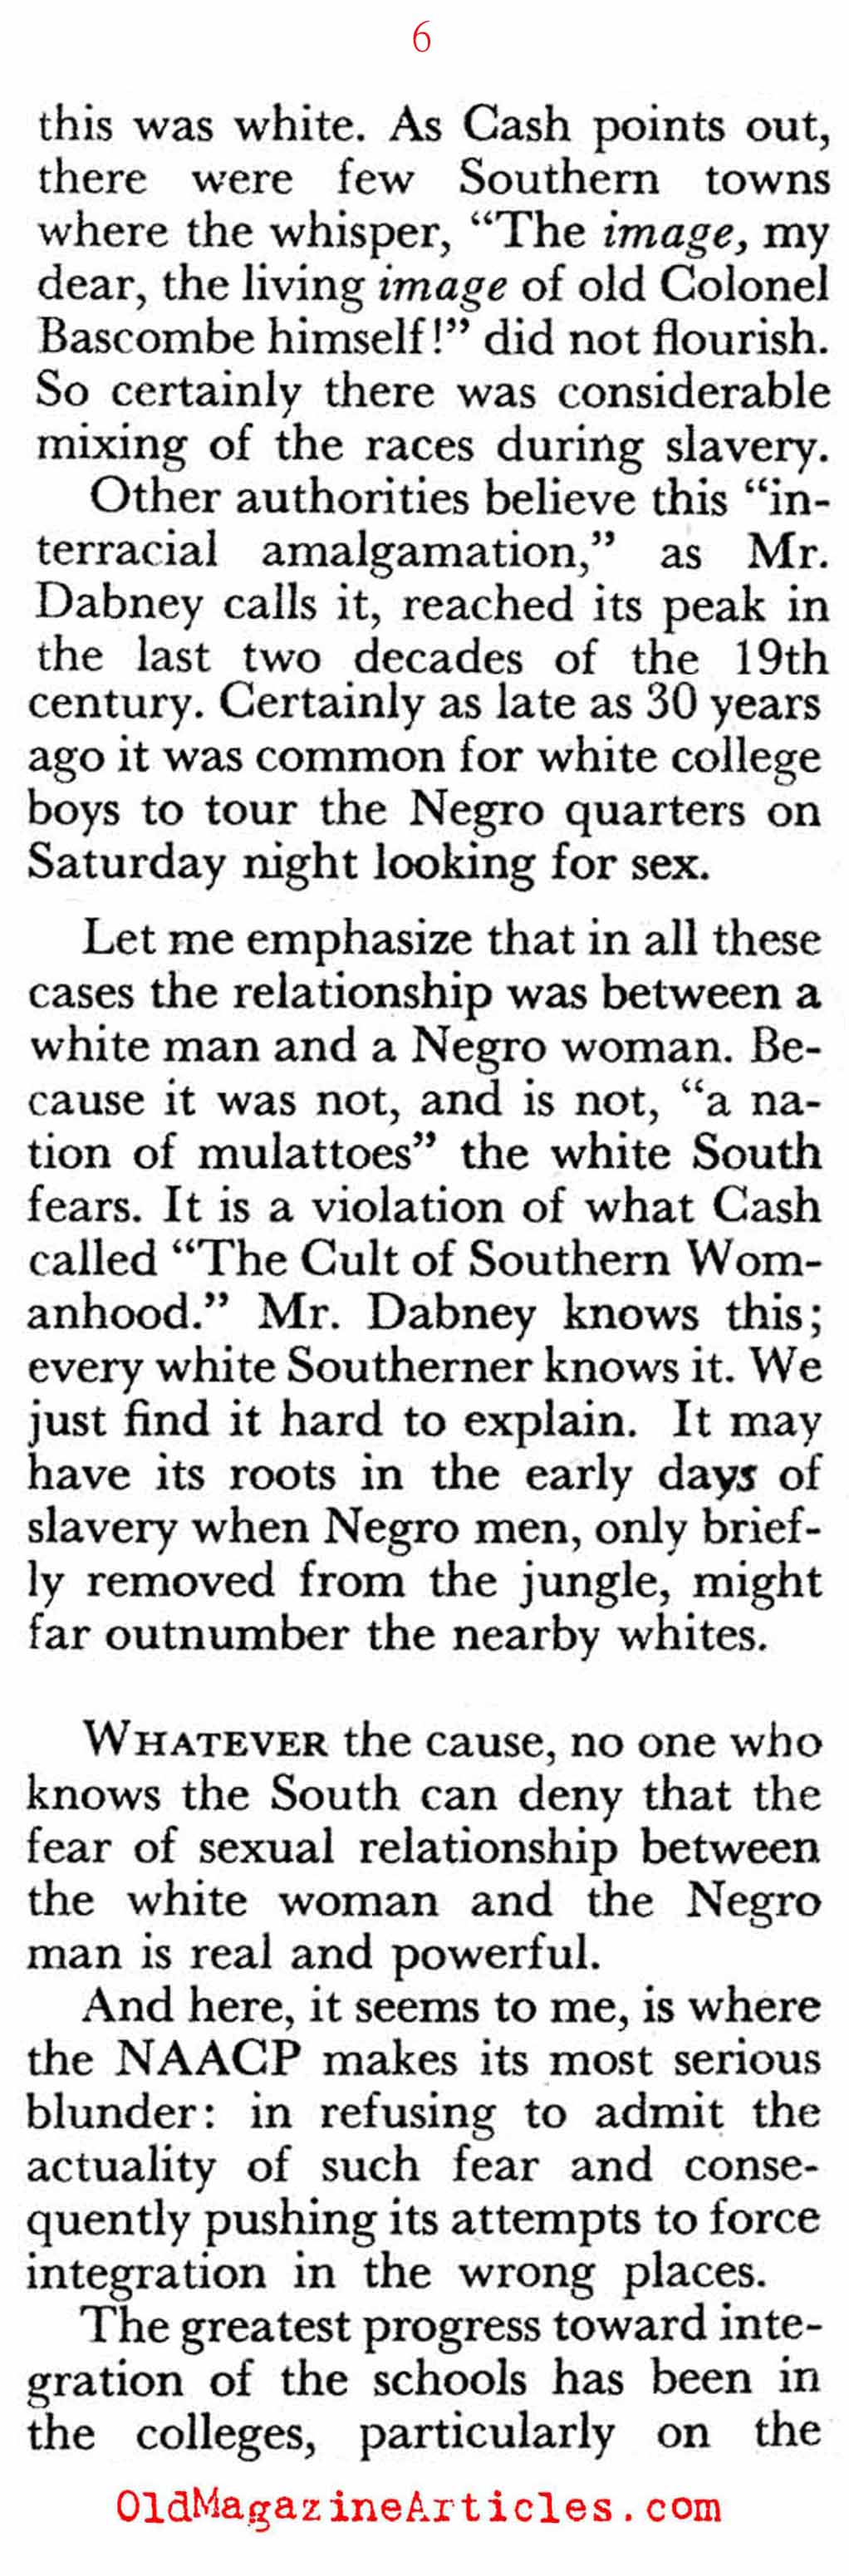 The Old Southern View of Integration (Pageant Magazine, 1959)